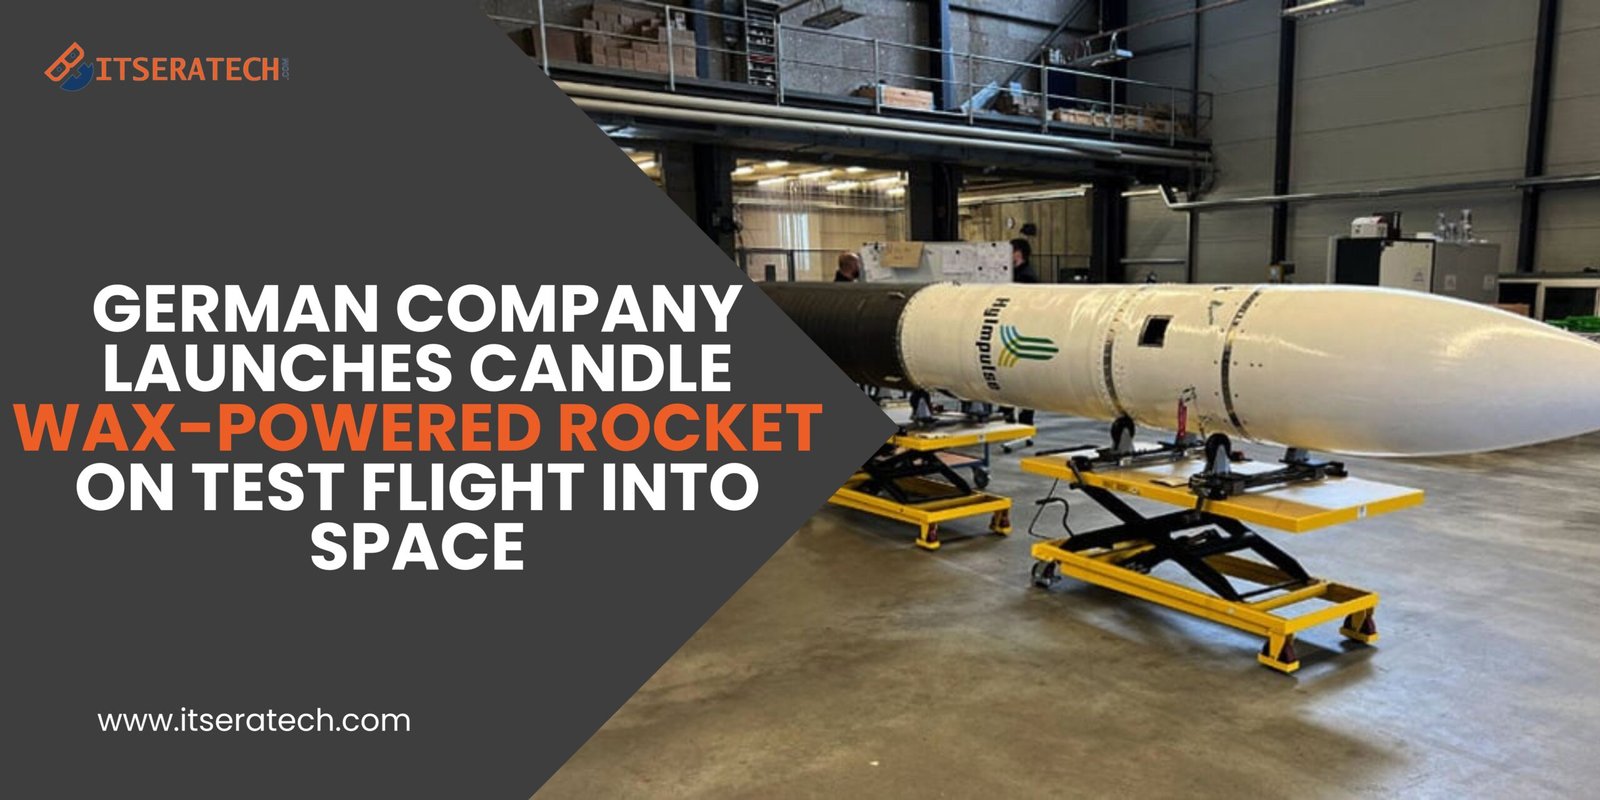 German Company Launches Candle Wax-Powered Rocket On Test Flight Into Space